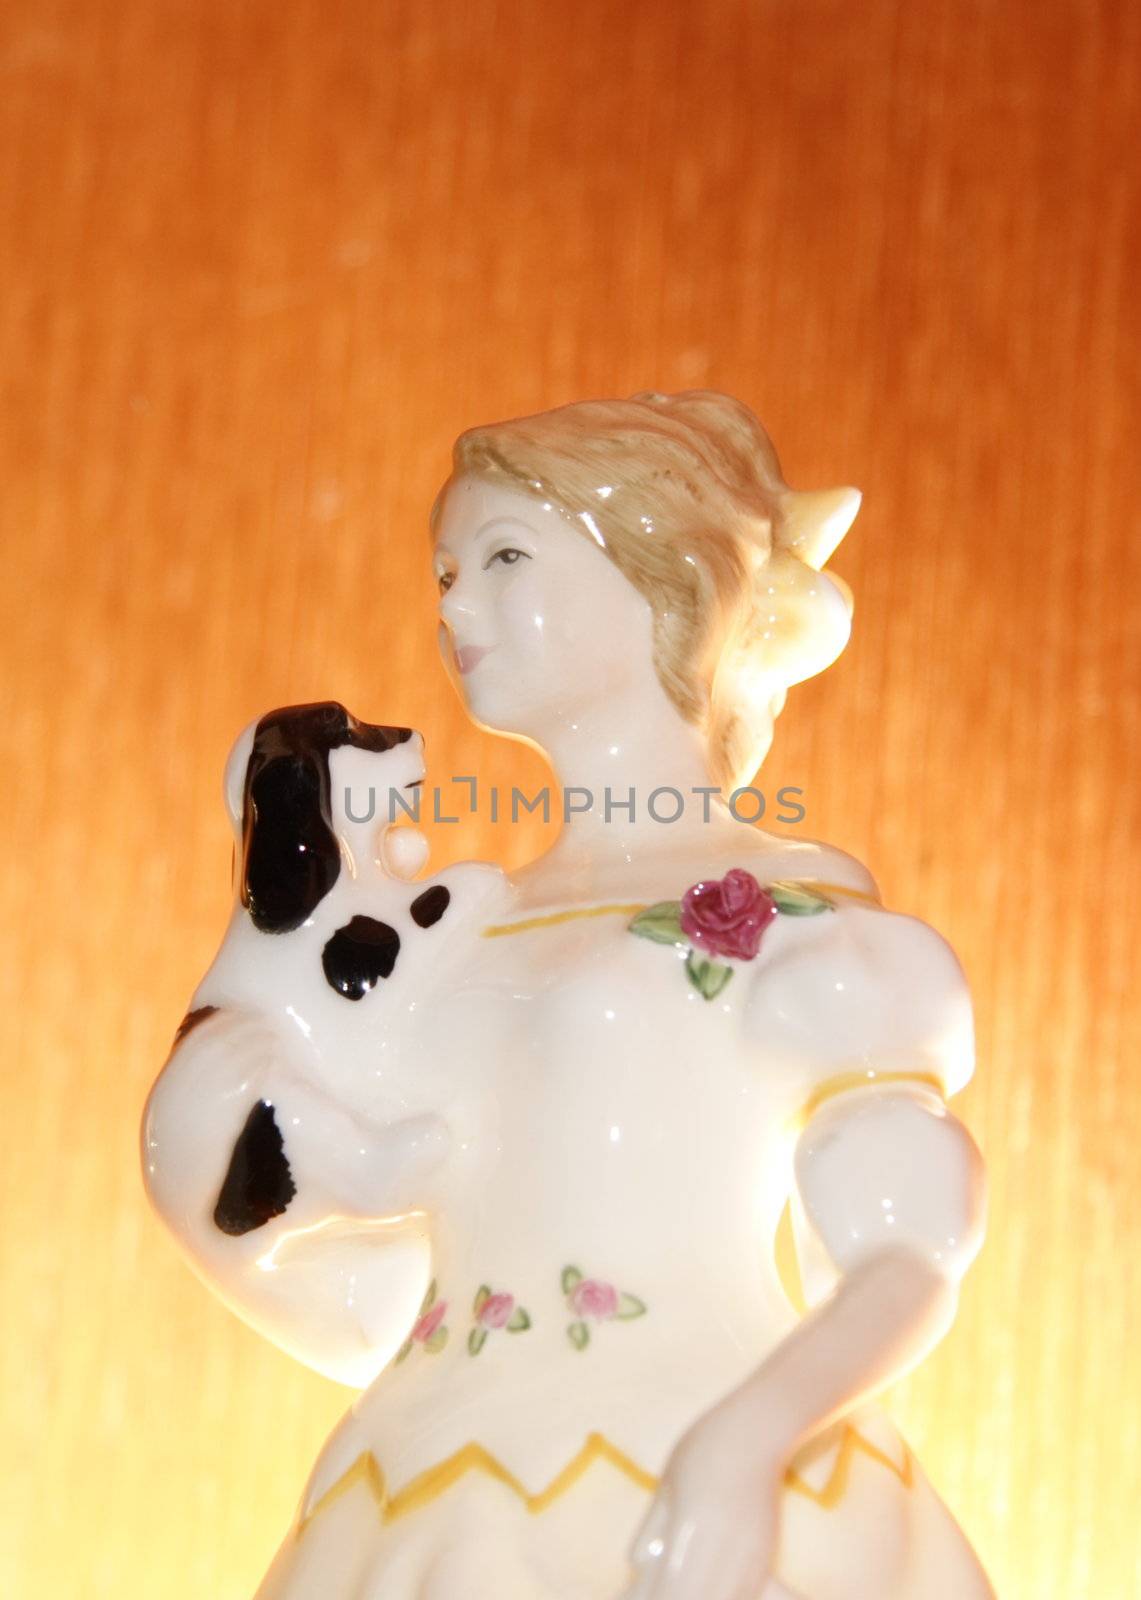 figurine lit frome behind against a wooden background